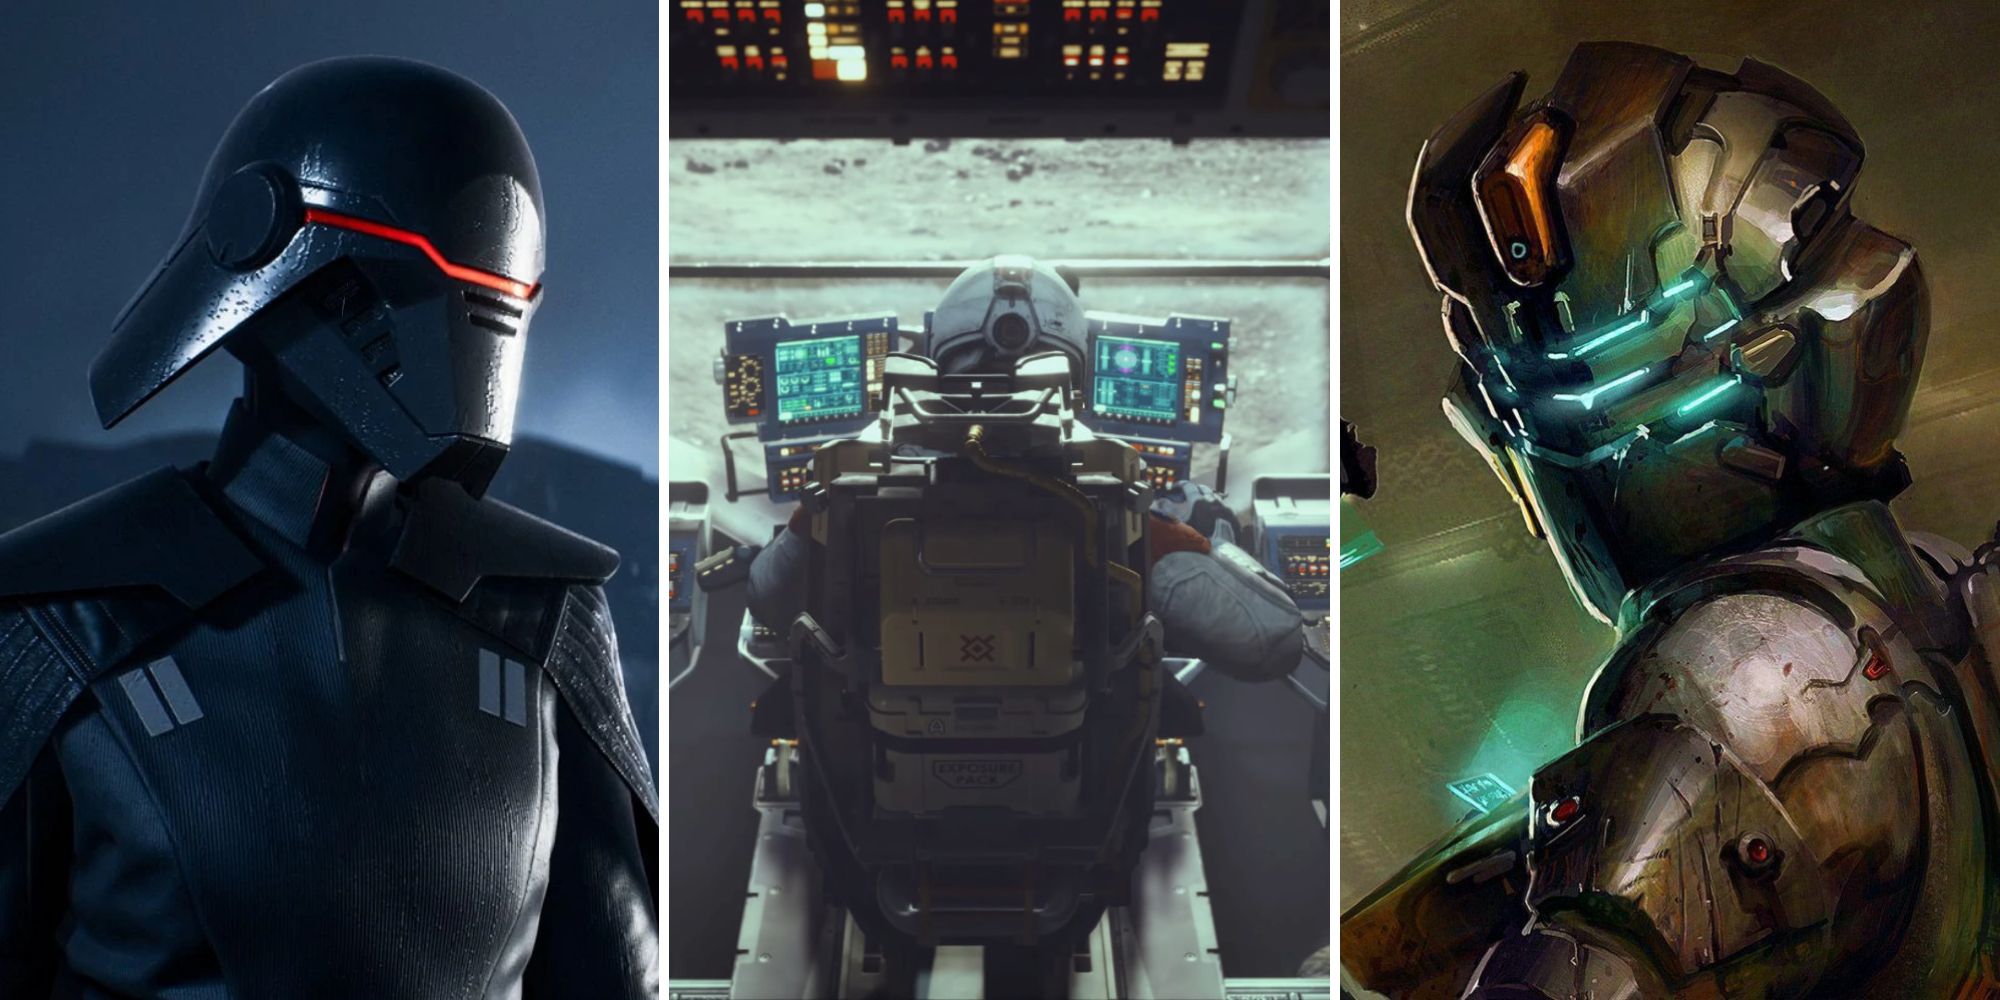 The Second Sister from Jedi: Fallen Order, an astronaut in a ship cockpit in Starfield, and Isaac from Dead Space